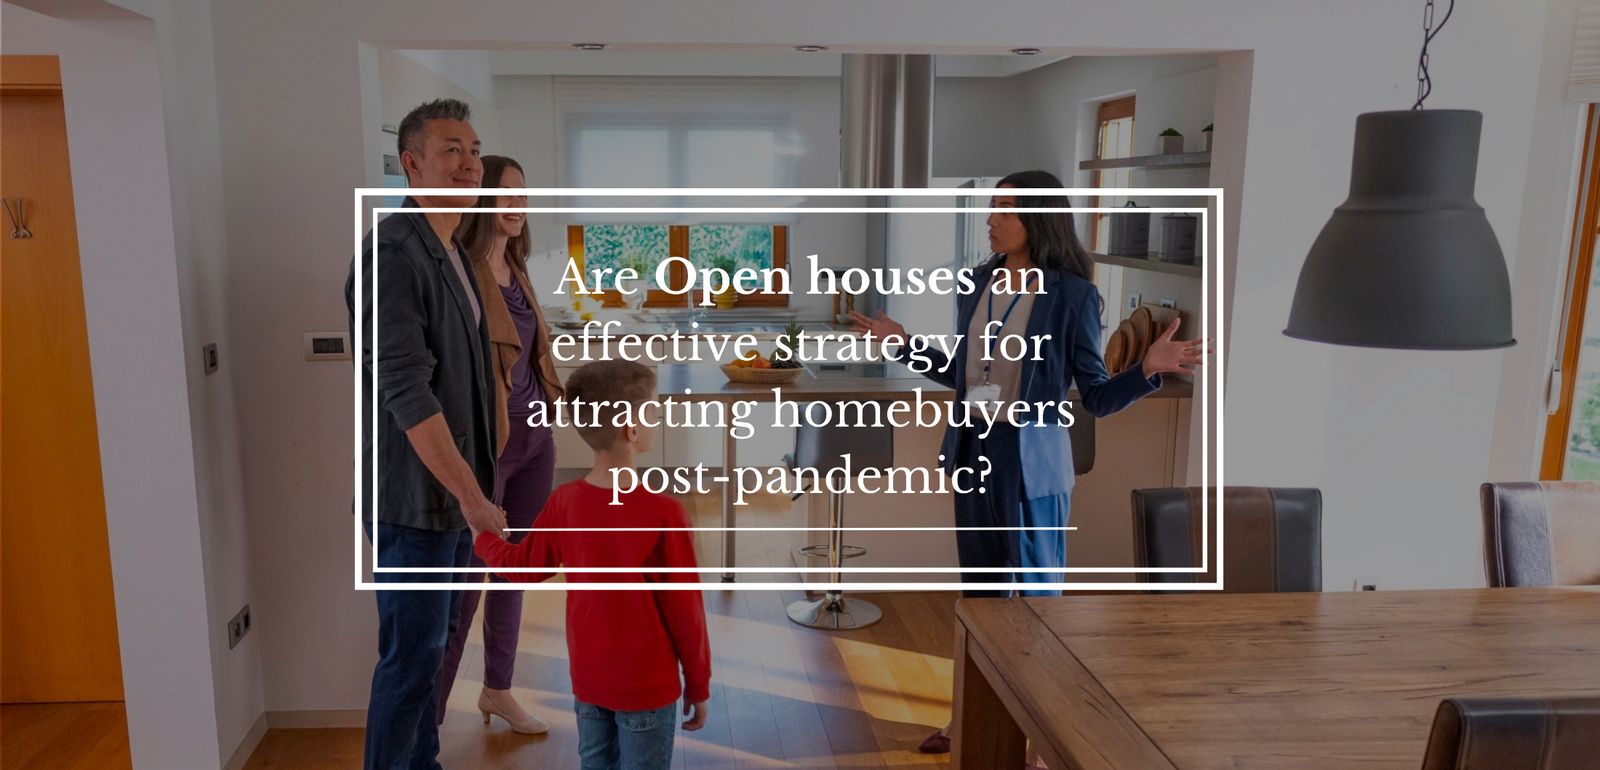 Open houses remain an effective strategy for attracting homebuyers post-pandemic: survey